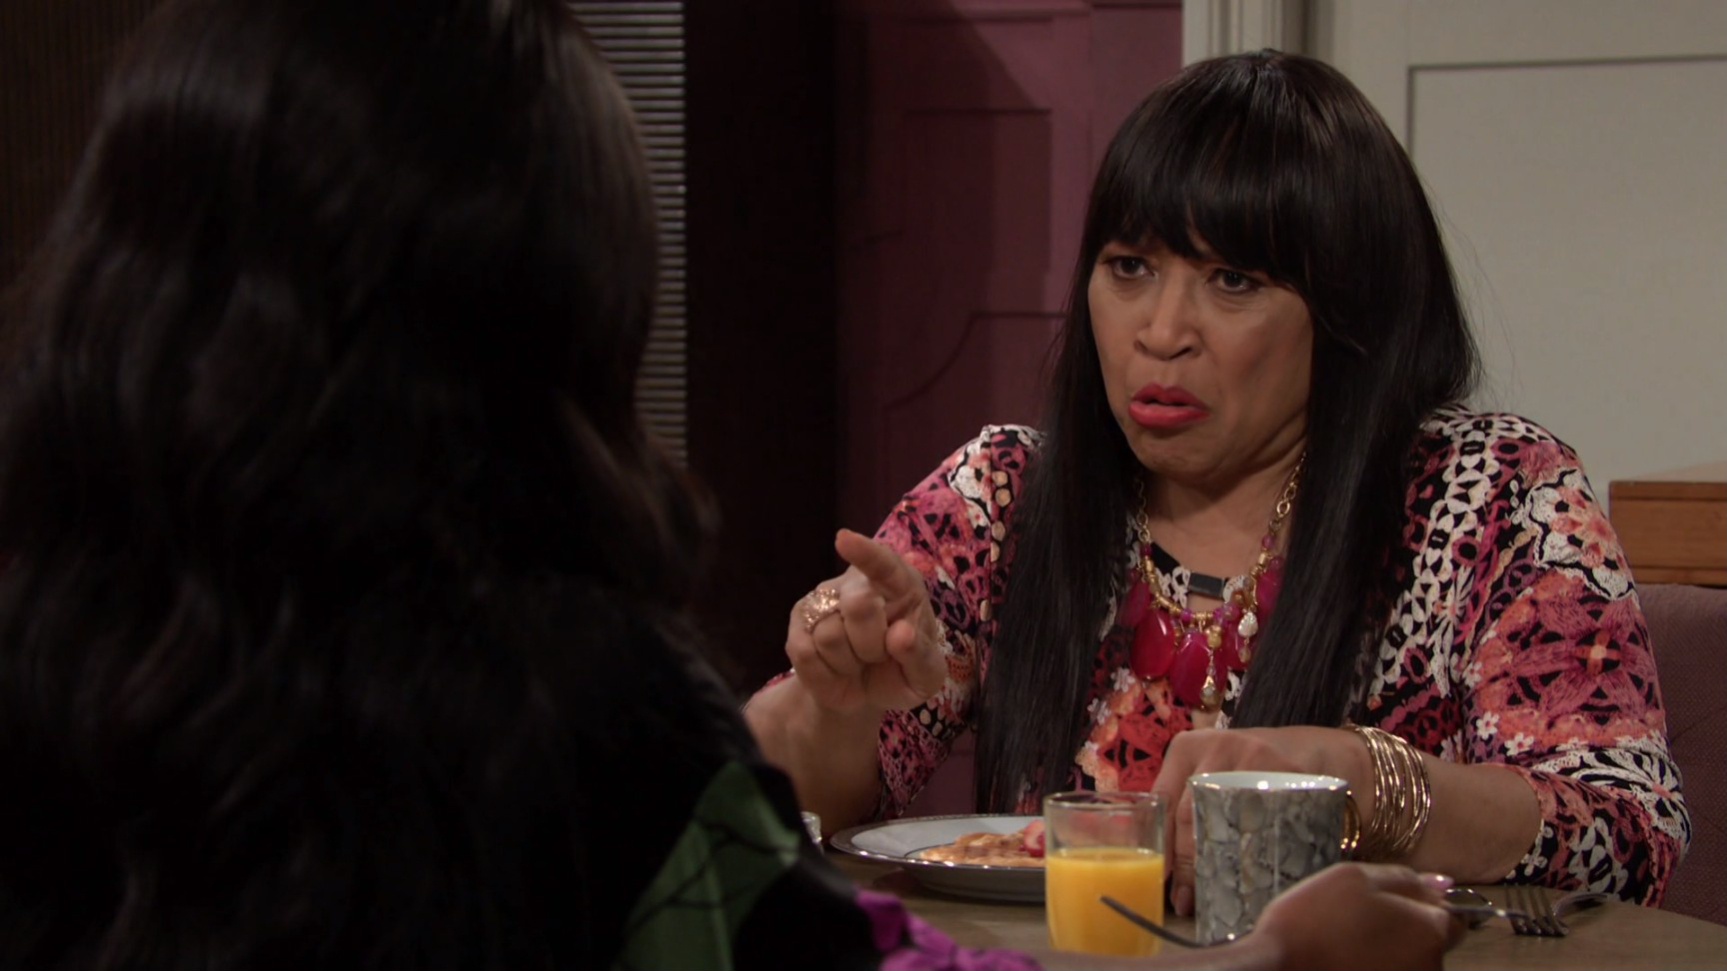 paulina upset daughter cheated Days of our Lives recaps